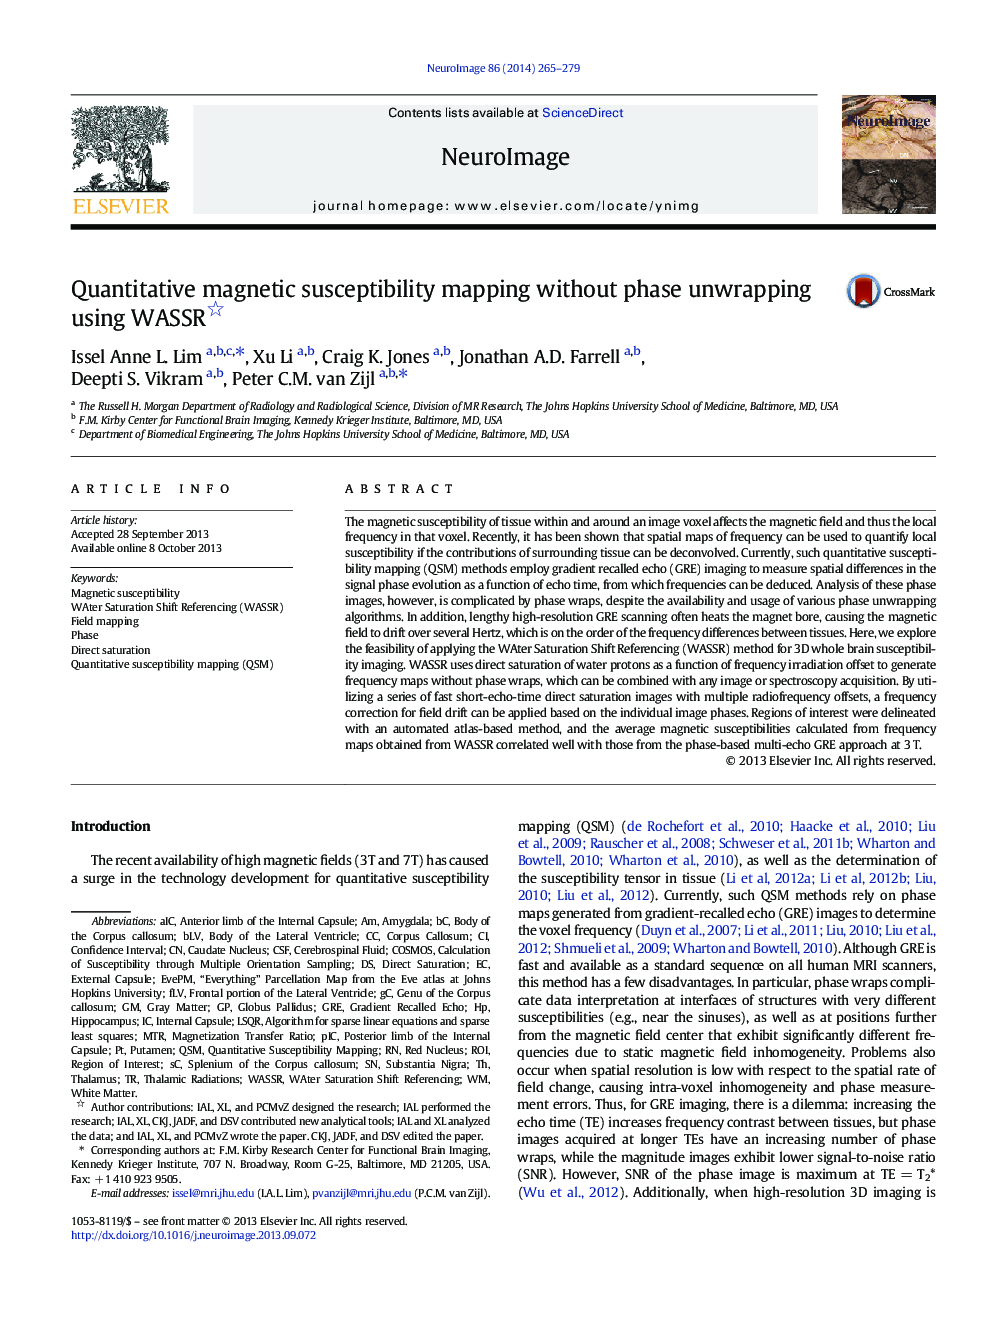 Quantitative magnetic susceptibility mapping without phase unwrapping using WASSR